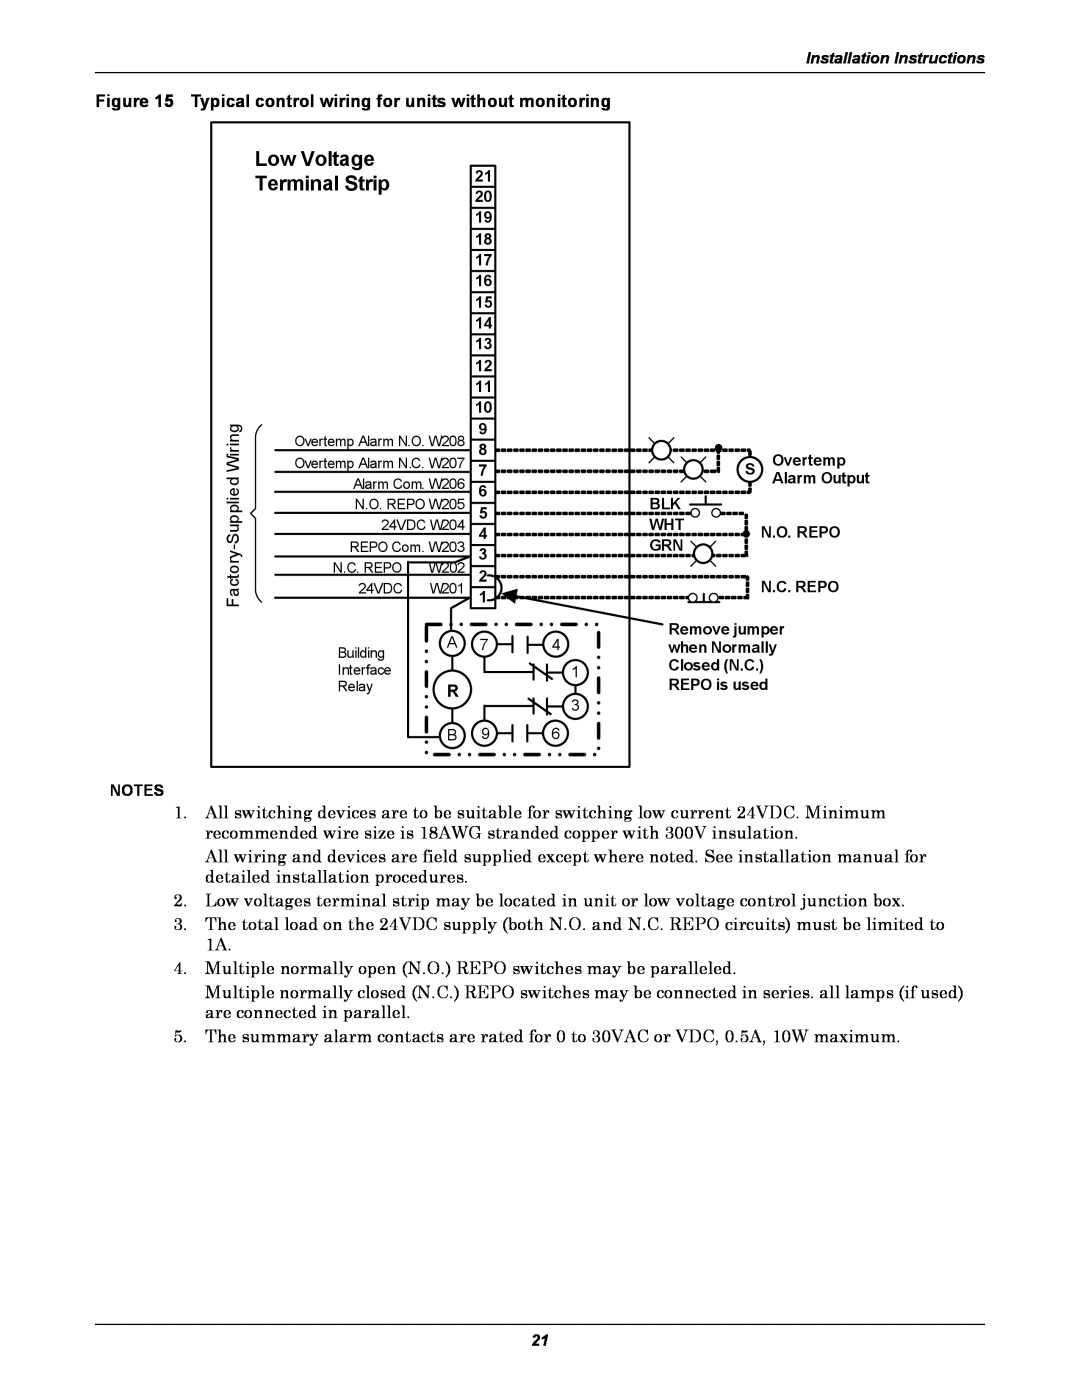 Emerson FPC user manual Low Voltage, Terminal Strip, Typical control wiring for units without monitoring, Wiring, Factory 